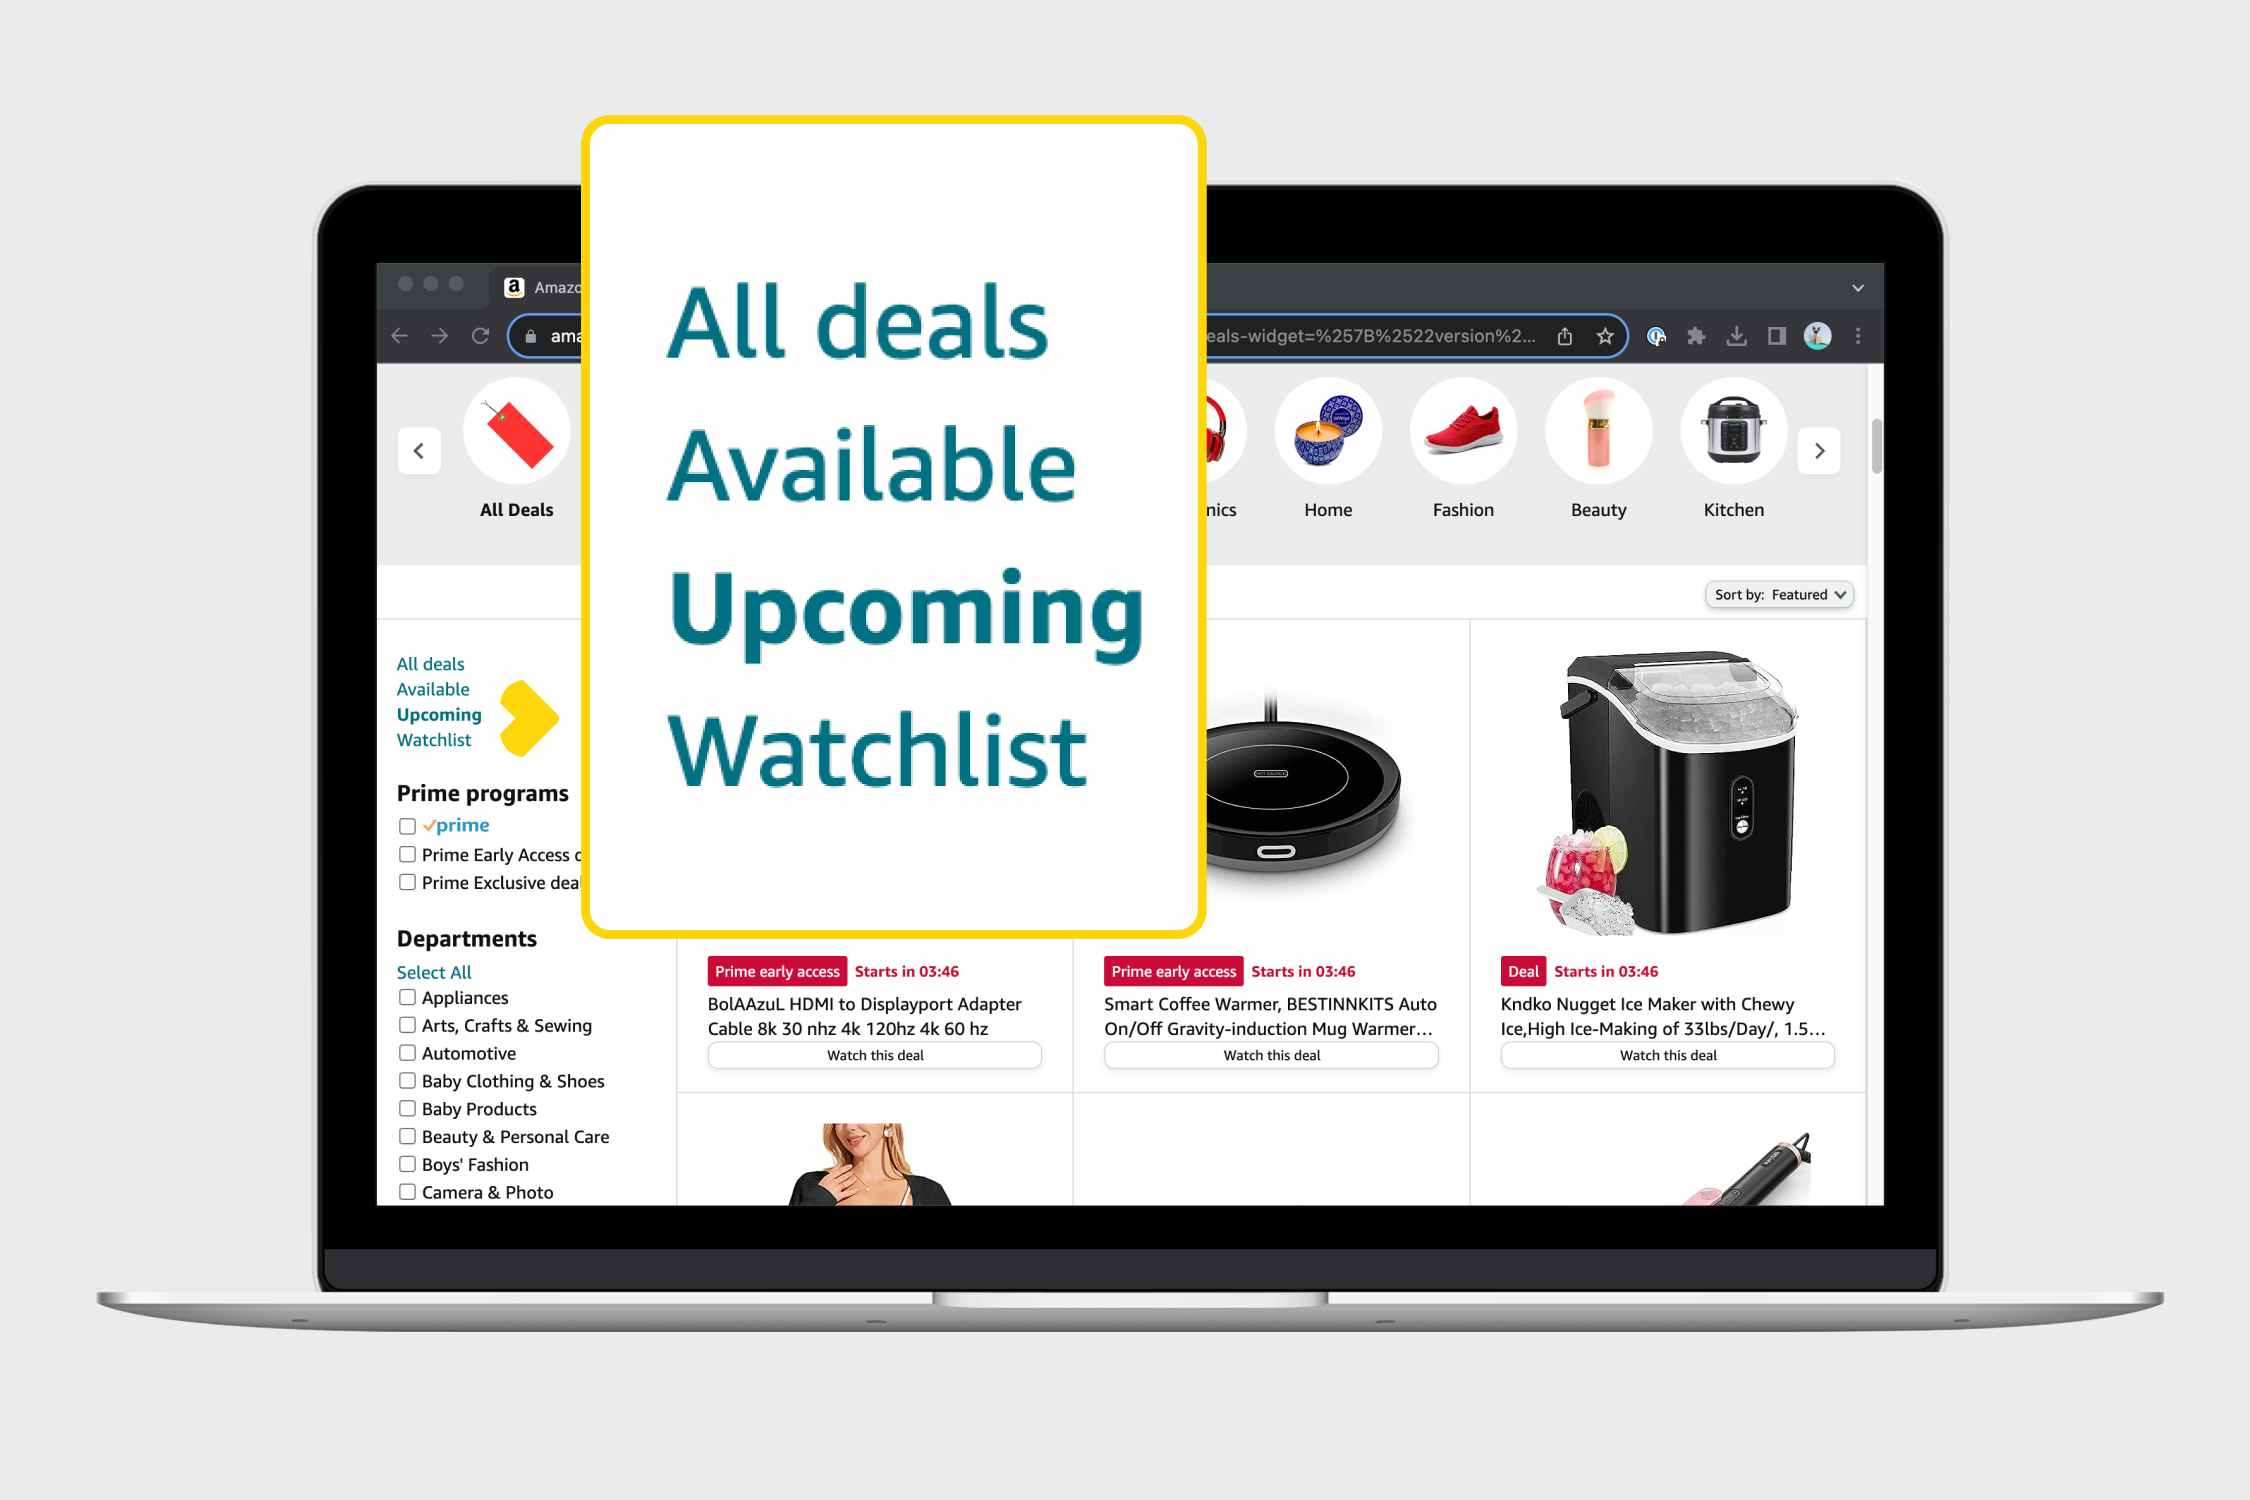 https://prod-cdn-thekrazycouponlady.imgix.net/wp-content/uploads/2020/12/amazon-lightning-deals-5-upcoming-screenshot-graphic-1692046609-1692046609.png?auto=format&fit=fill&q=25